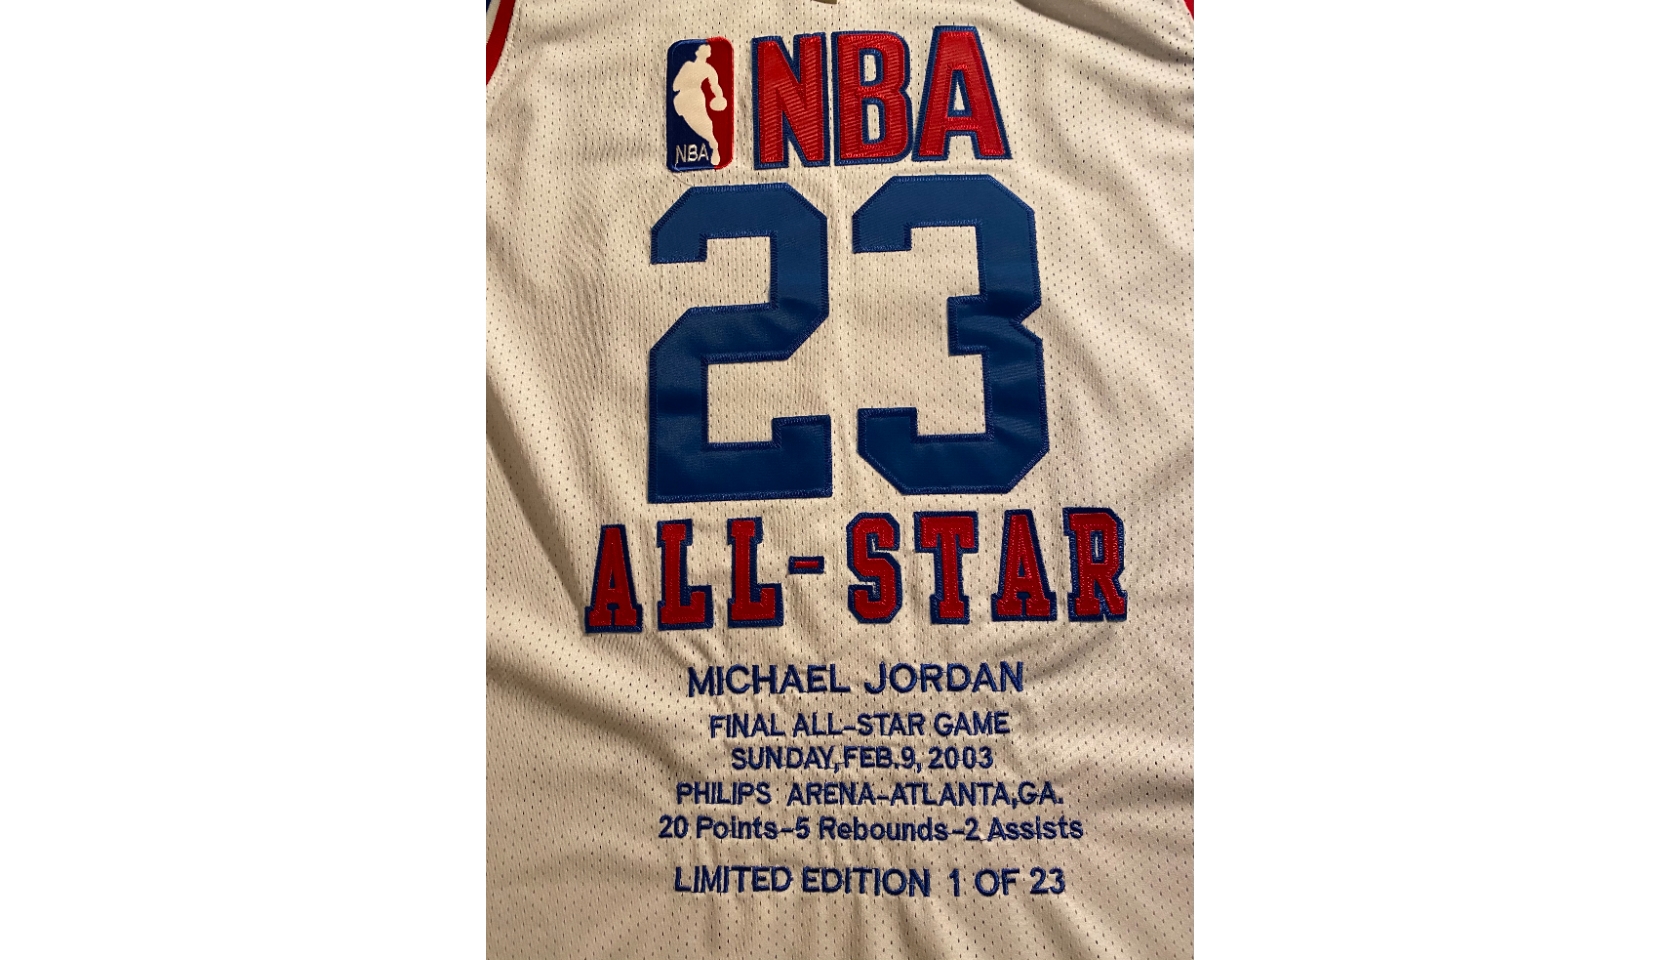 MICHAEL JORDAN FINAL ALL-STAR GAME 2003 JERSEY Limited 1 Of 23 Size 56